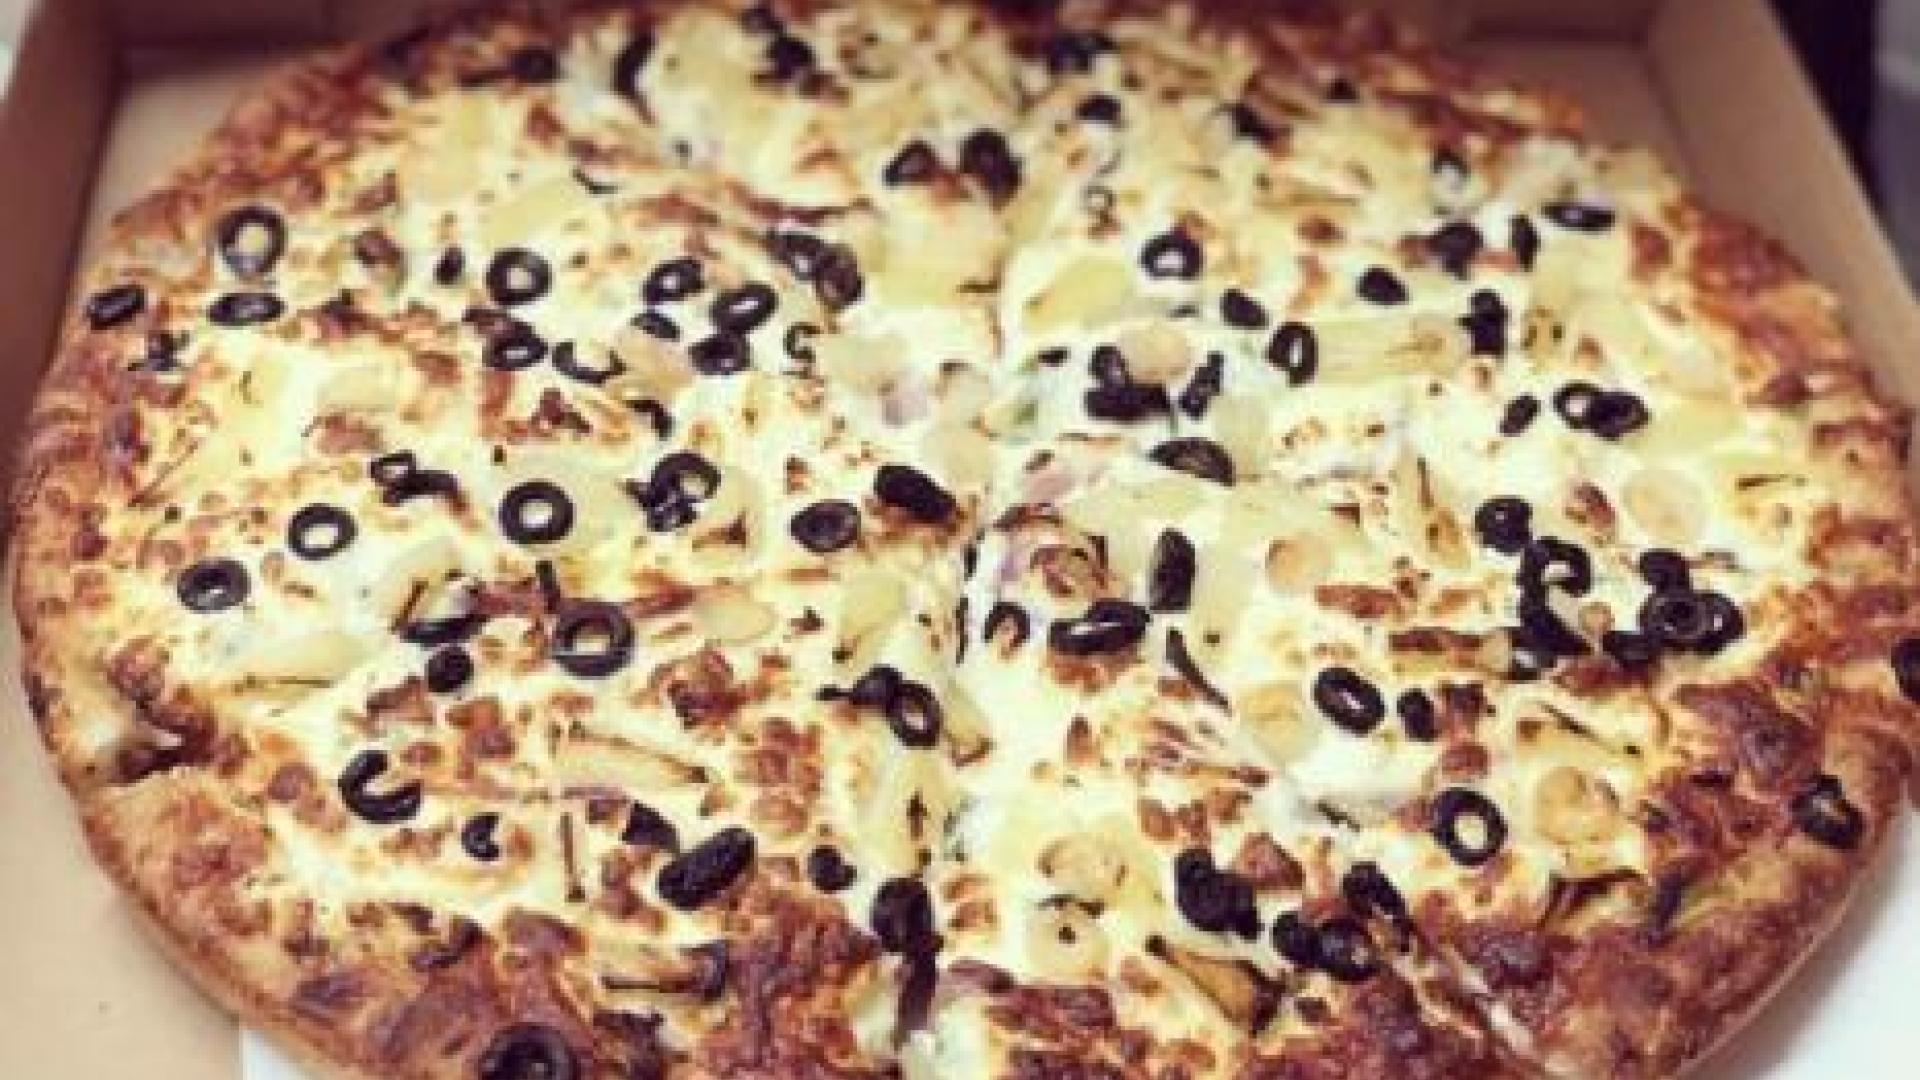 Cheese pizza with olives.